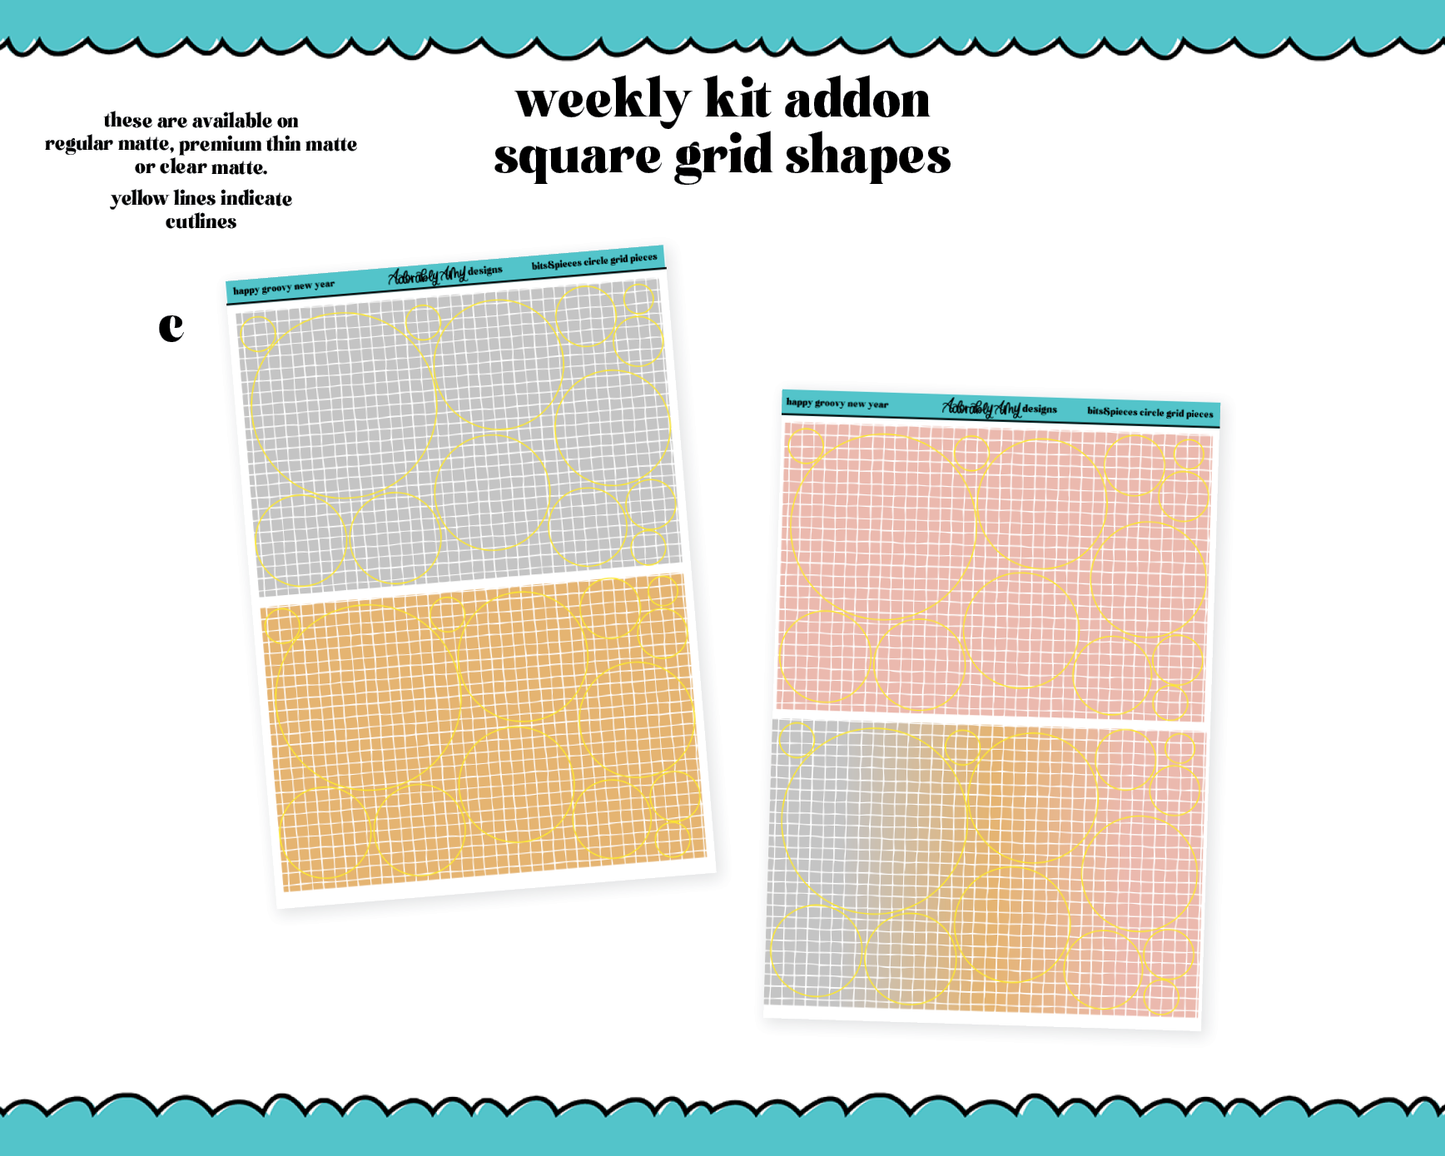 Happy Groovy New Year Weekly Kit Addons - All Sizes - Deco, Smears and More!